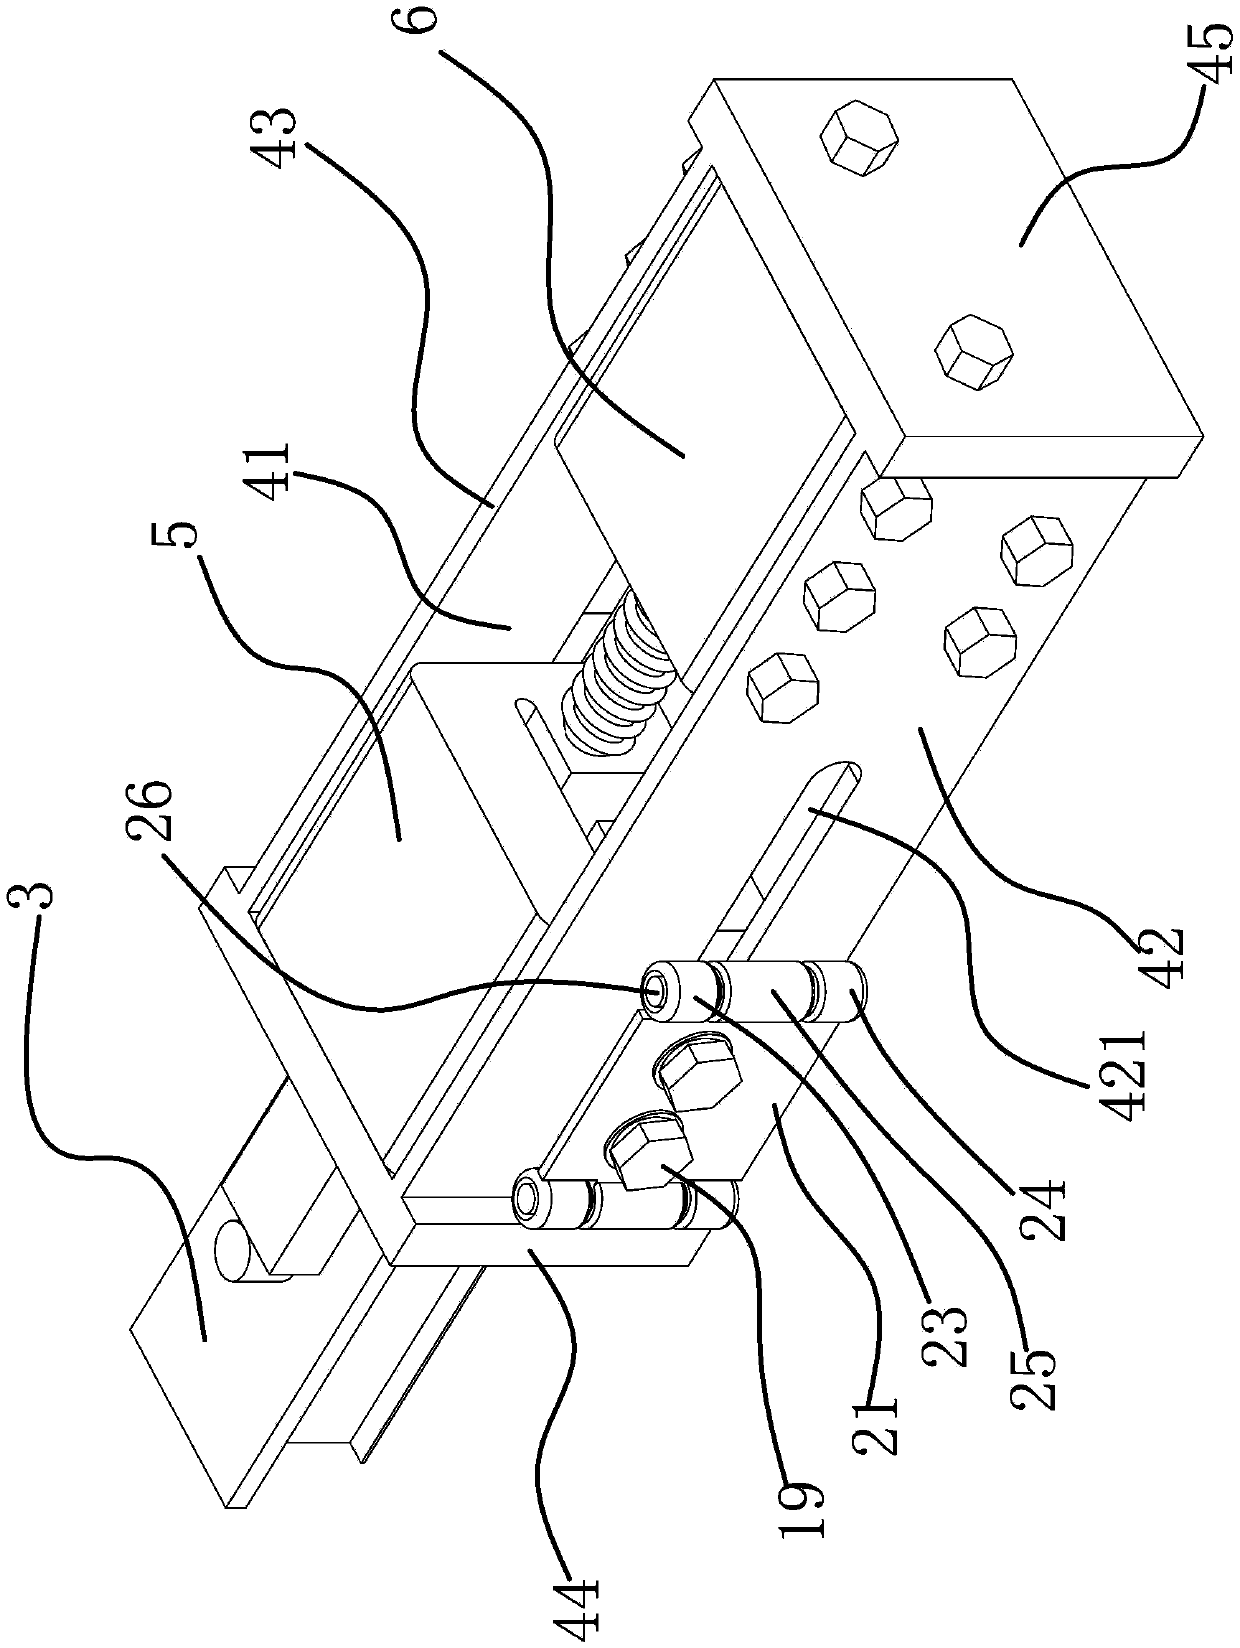 Disconnectable busbar joint device of rigid contact network